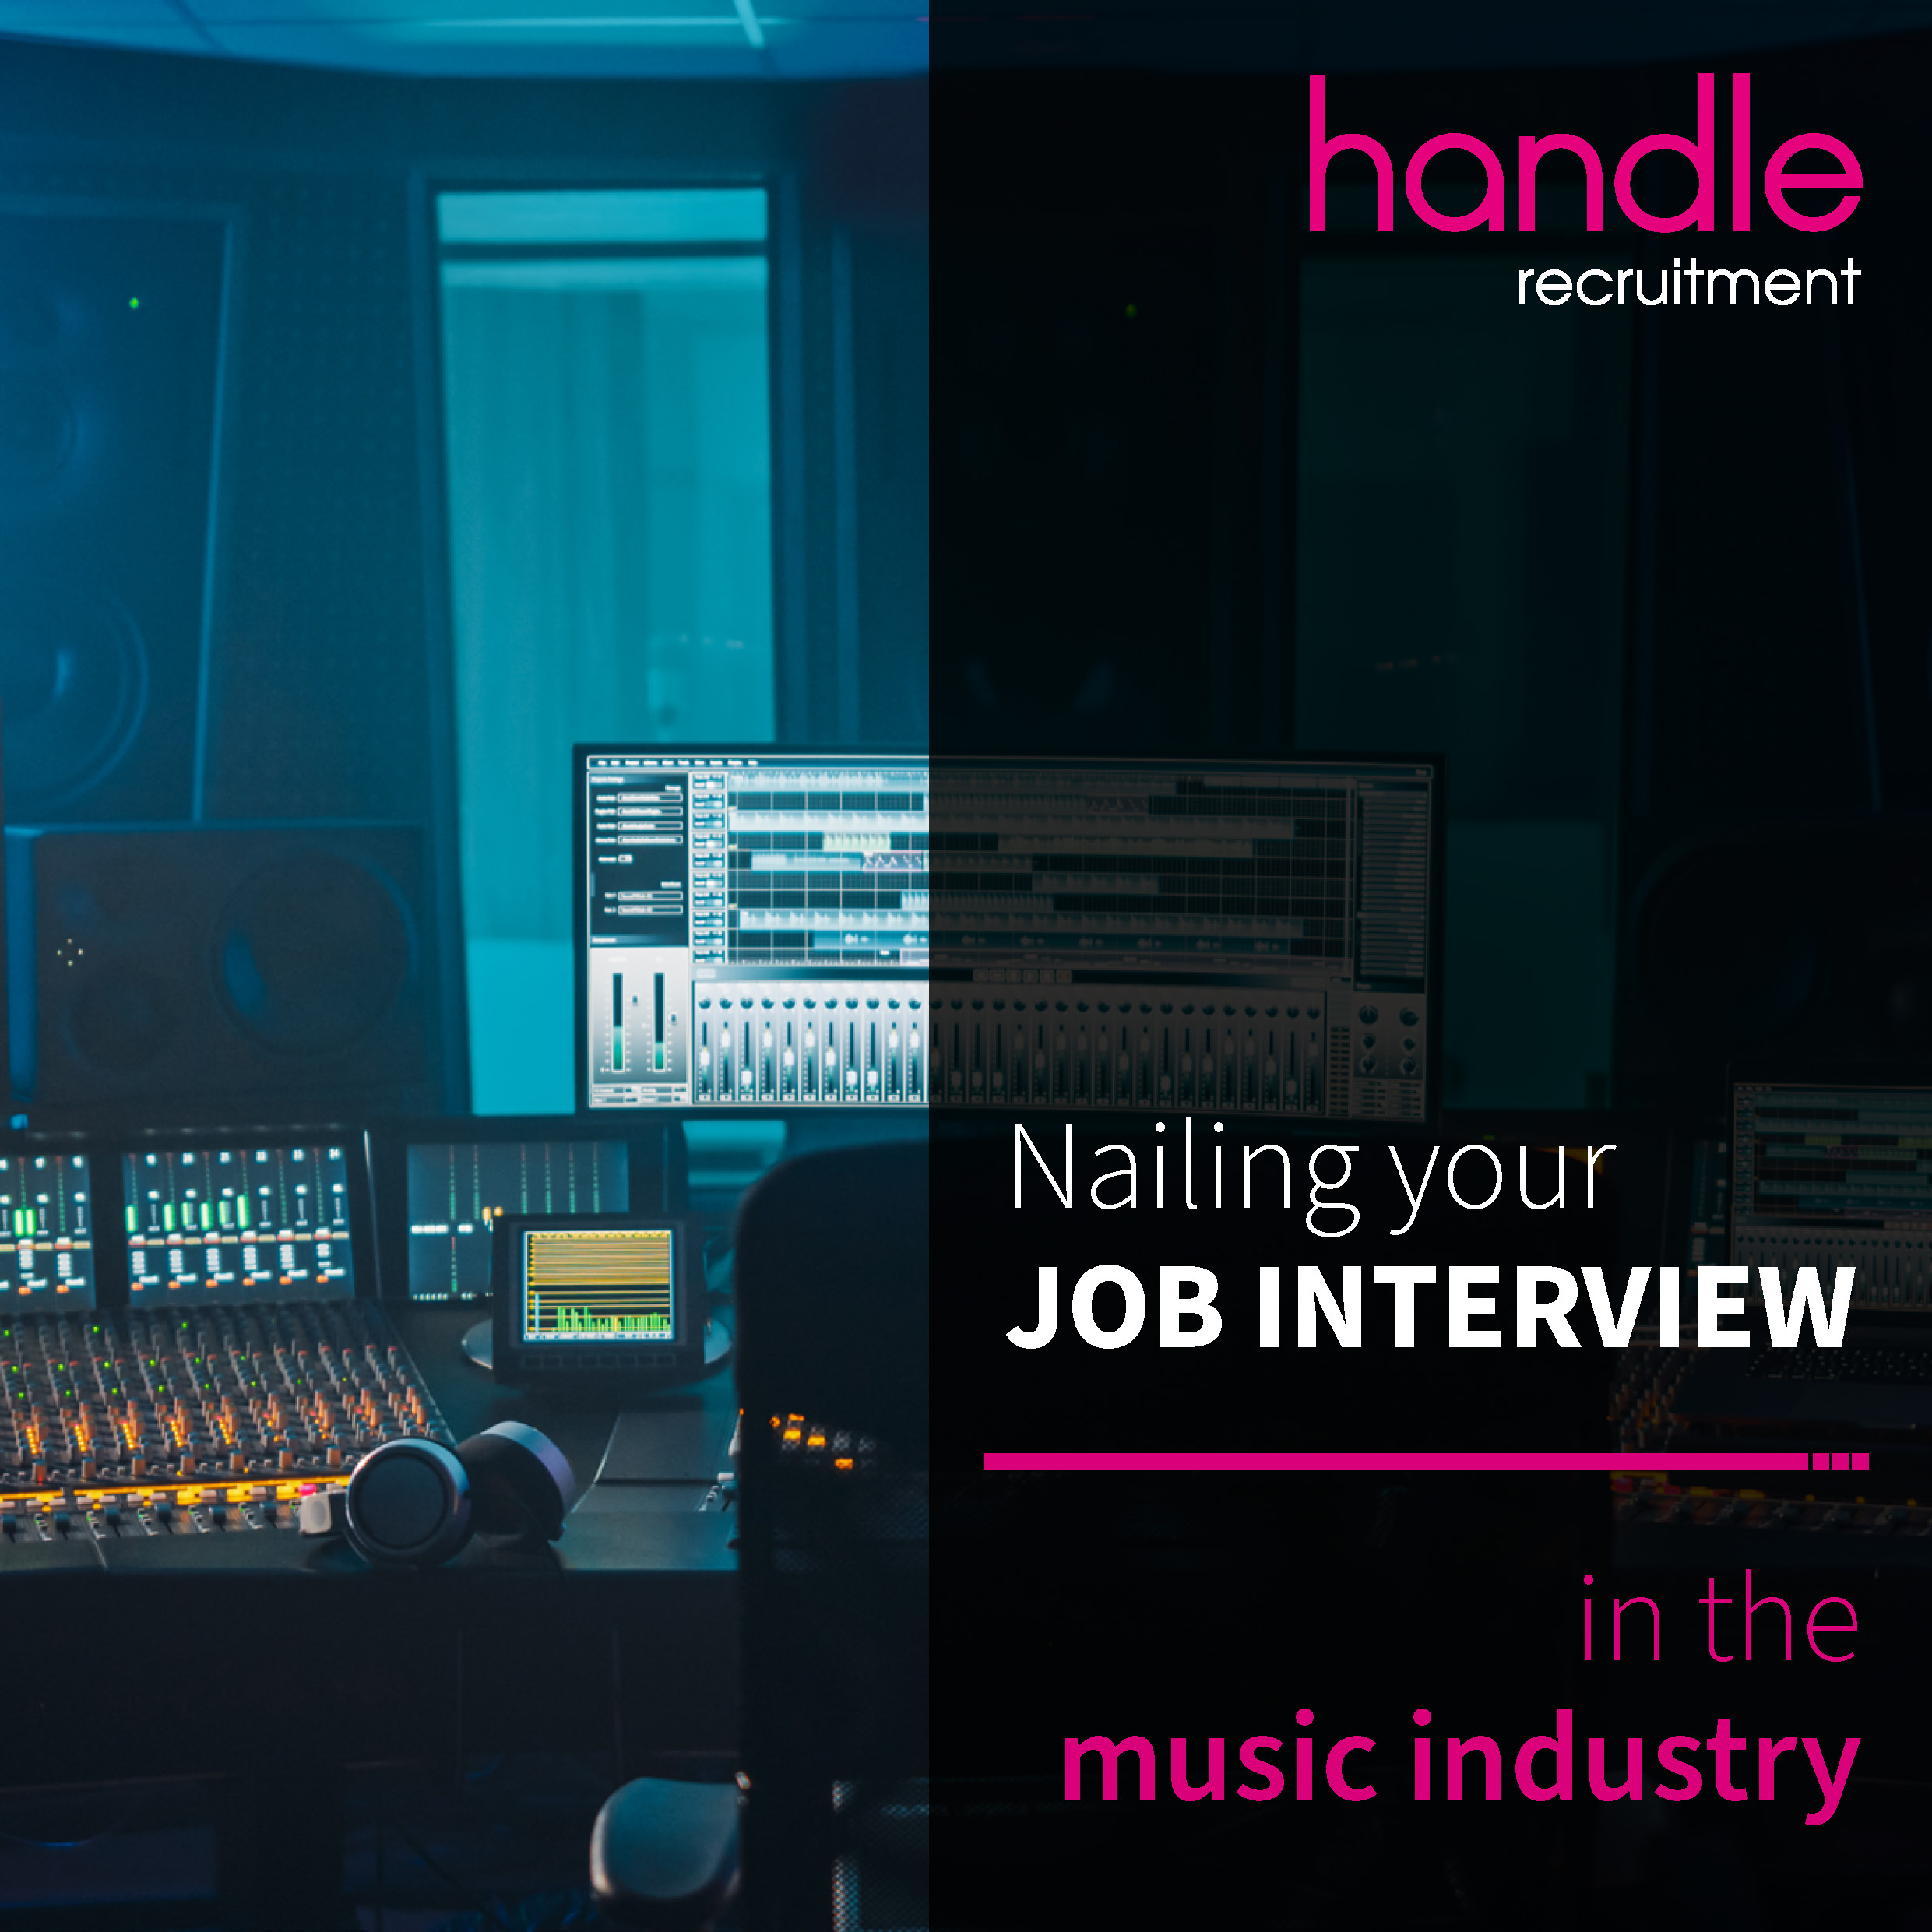 A guide to interviews in the music industry